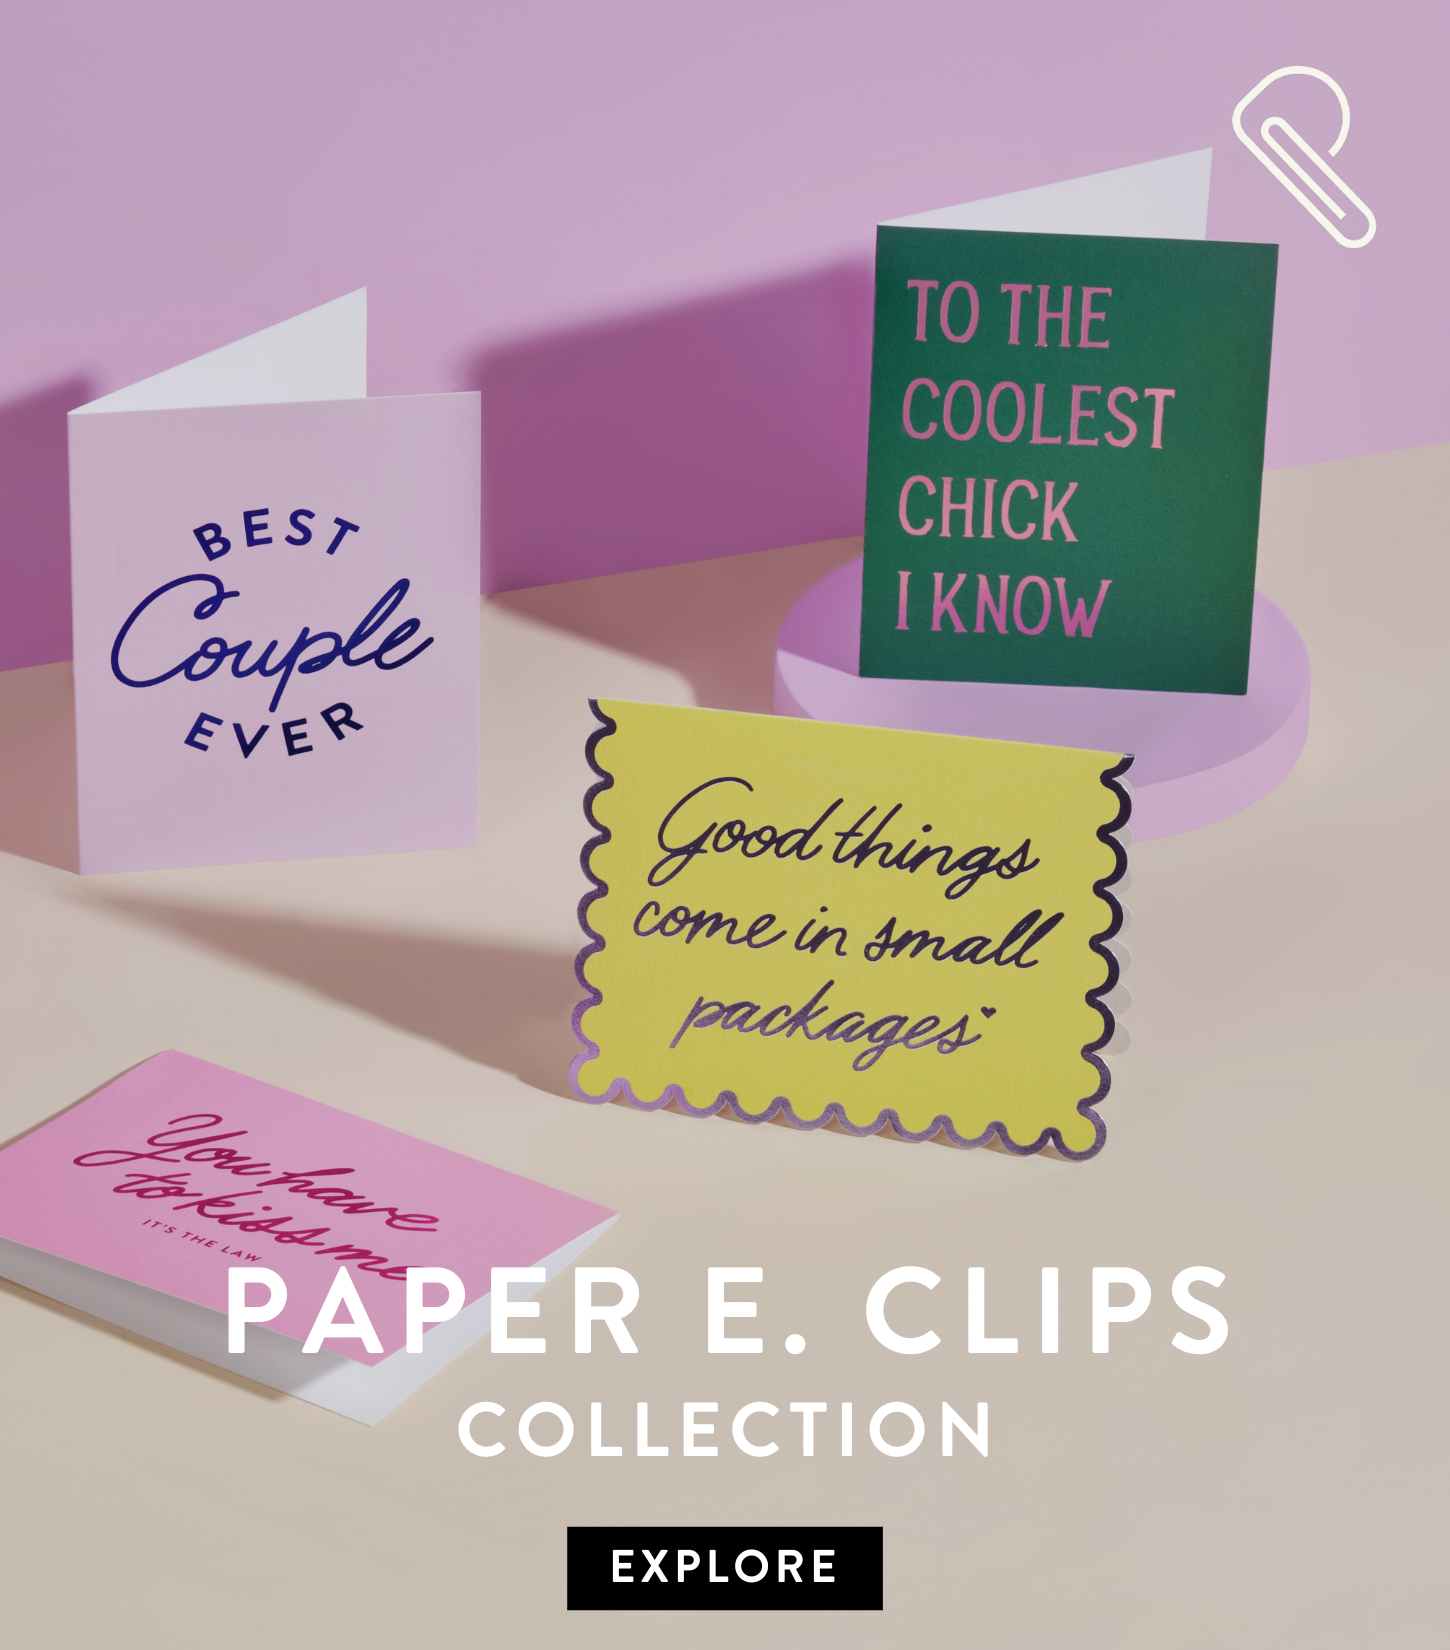 Paper E. Clips Inc  Wholesale Distributor of greeting cards and gifts